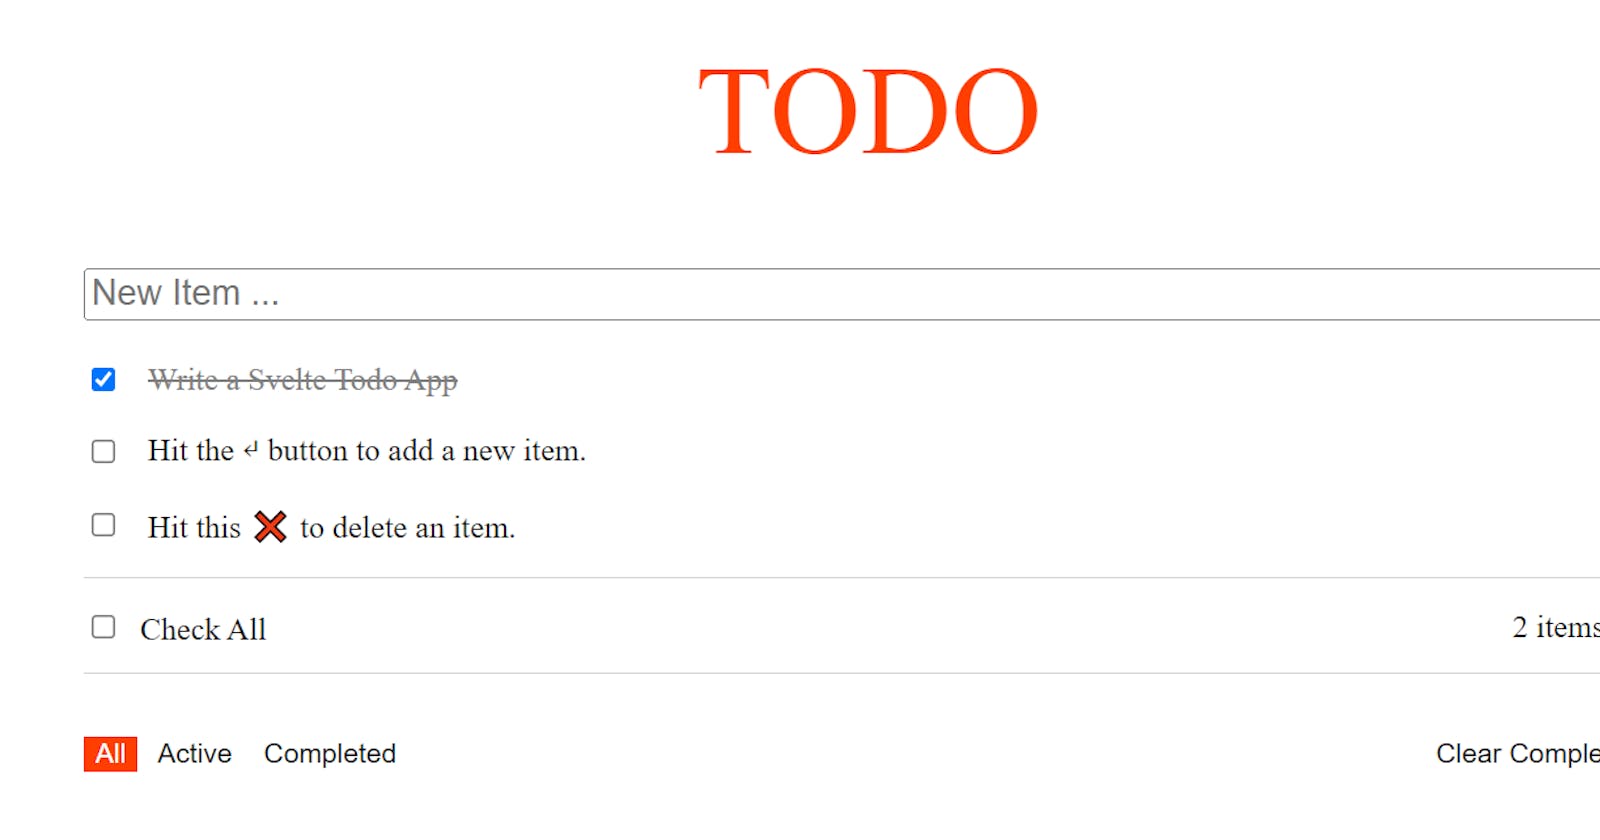 How to build your own Todo App with SvelteJS?